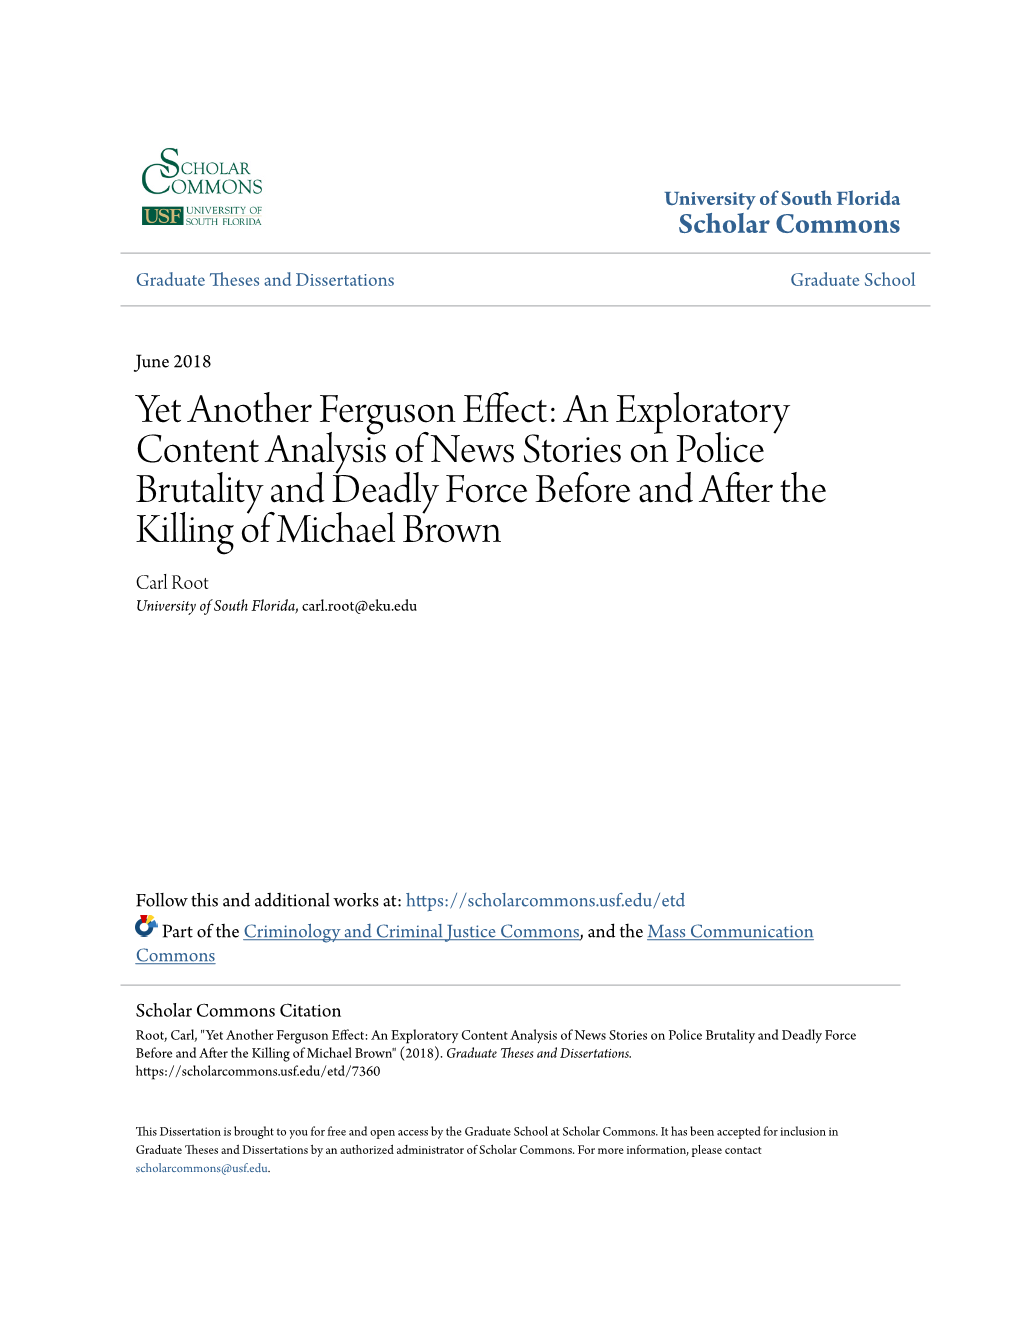 Yet Another Ferguson Effect: an Exploratory Content Analysis Of